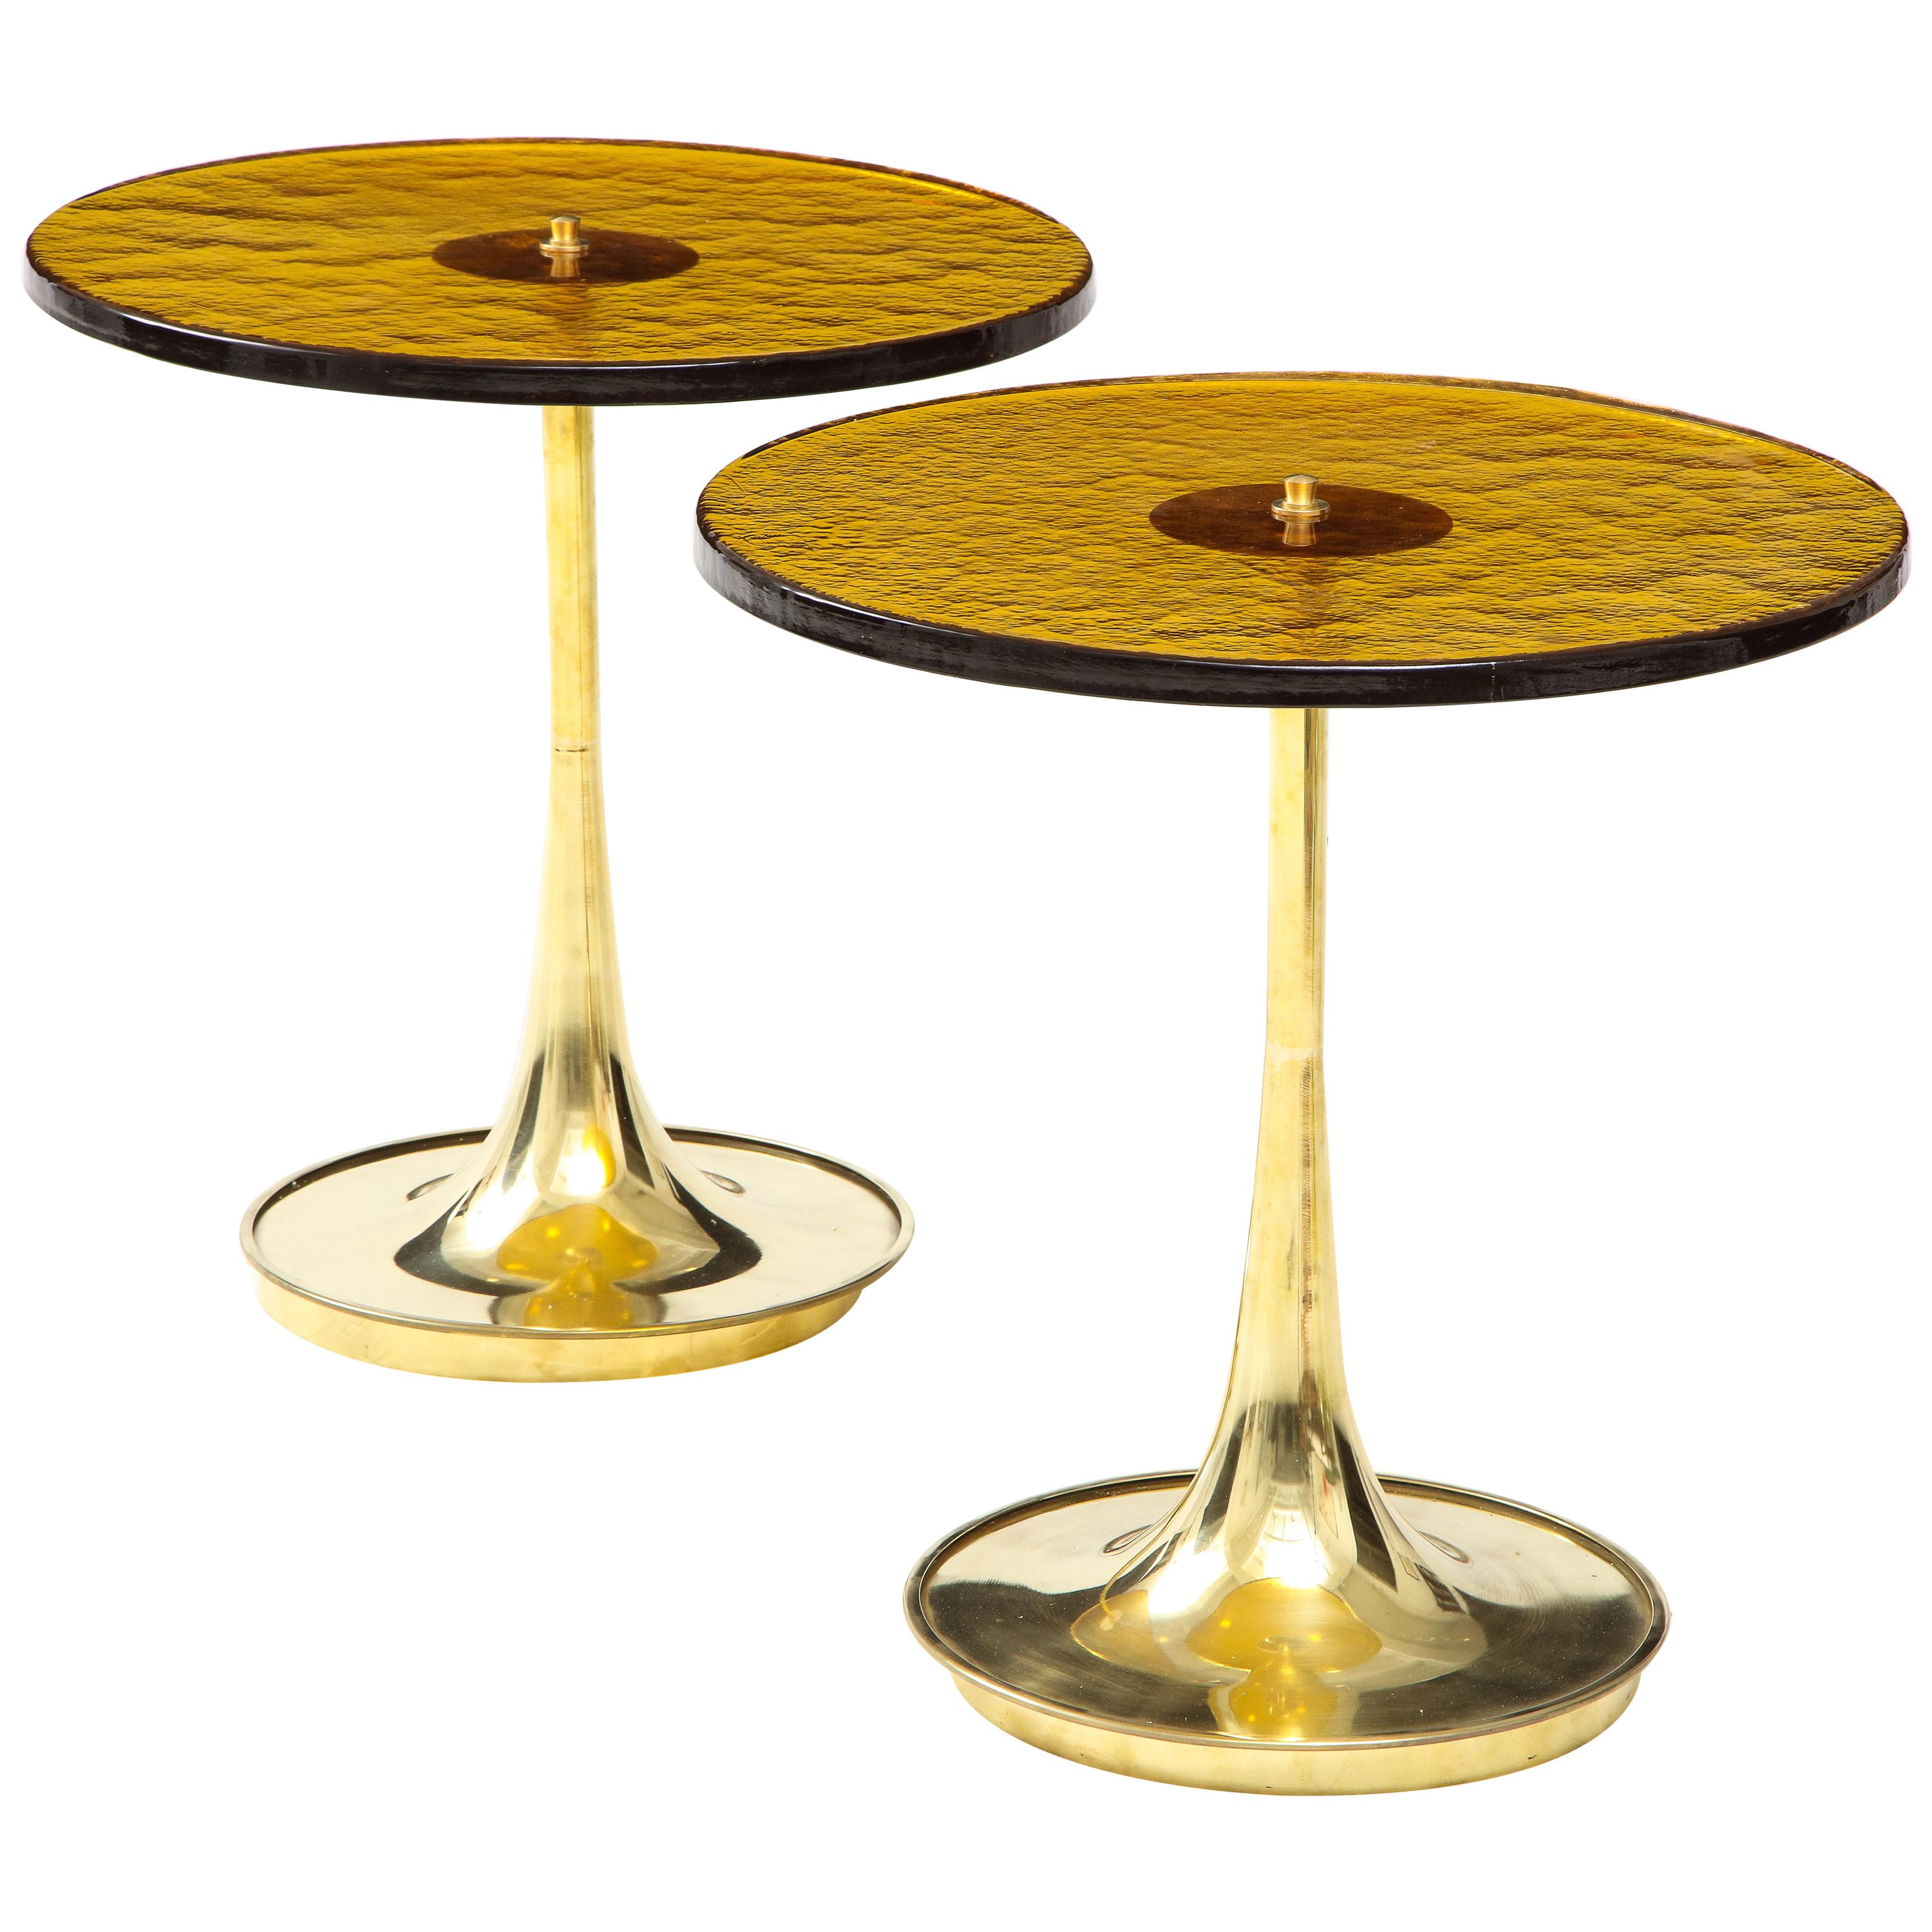 Pair of Round Bronze Murano Glass and Brass Martini or Side Tables, Italy, 2021